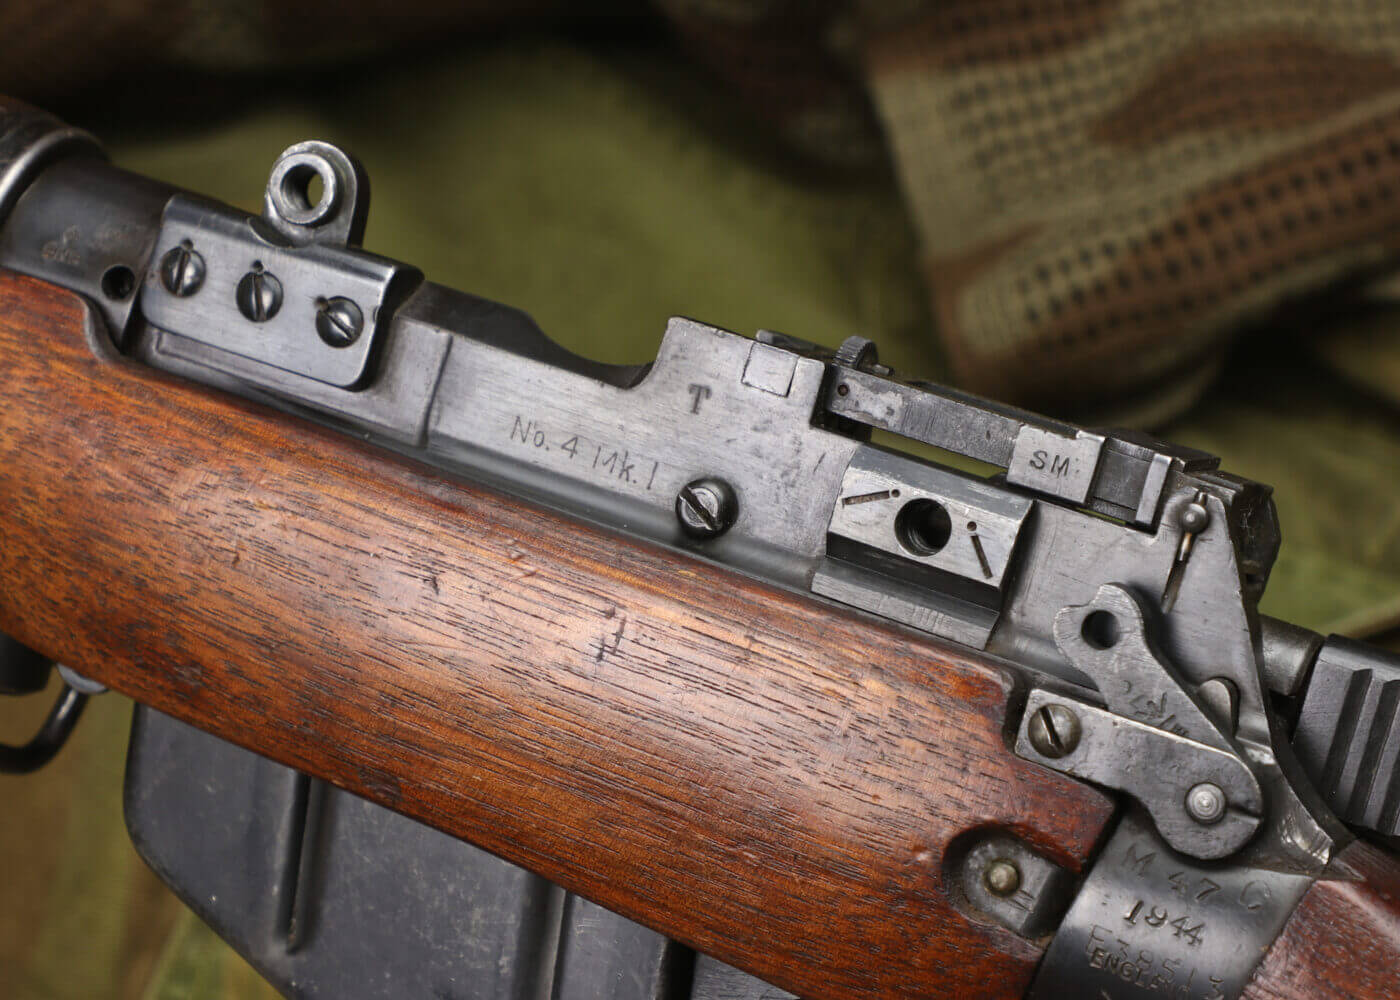 Lee-Enfield Rifle No.4 and the Sniping rifle No.4T